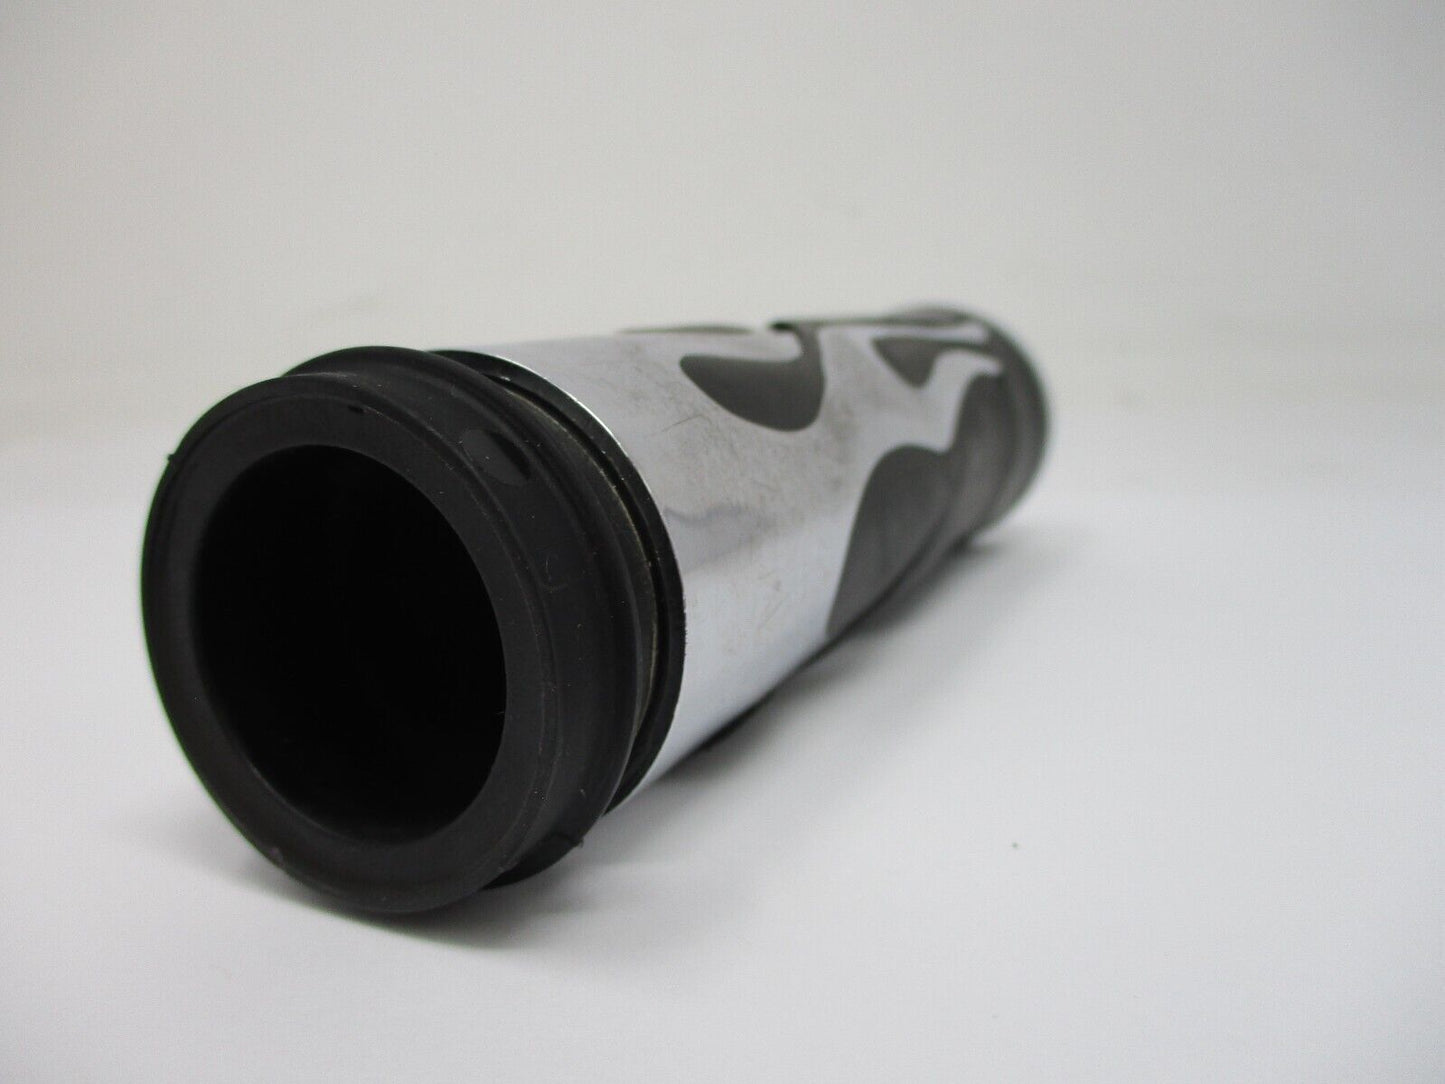 Drag Specialties Flamed Grip Right Side From Kit 0630-0613